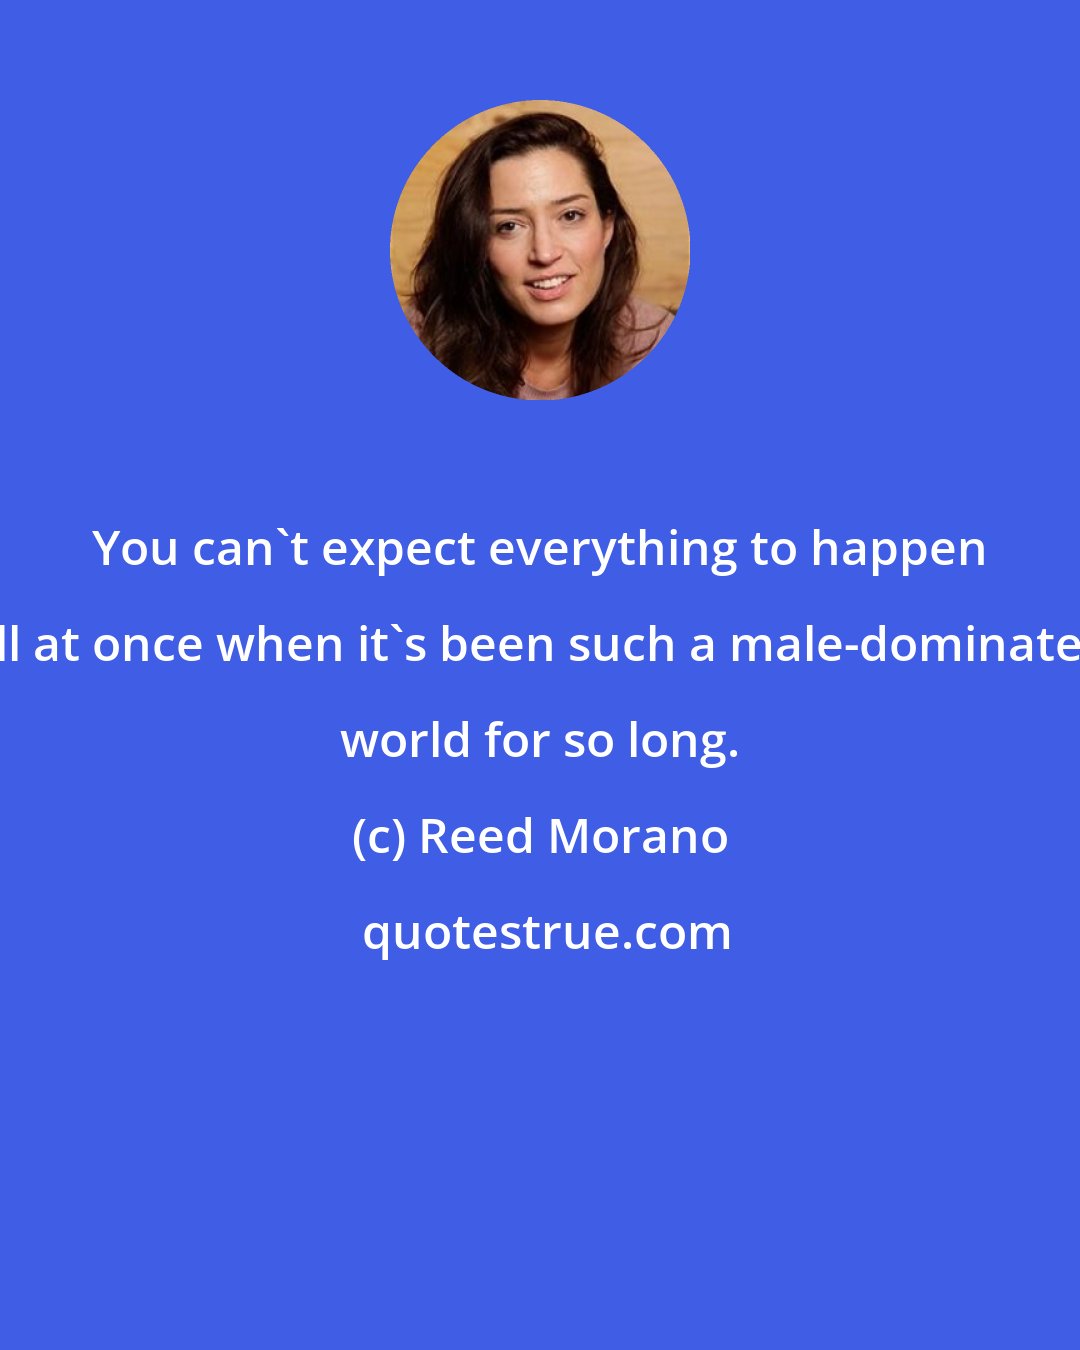 Reed Morano: You can't expect everything to happen all at once when it's been such a male-dominated world for so long.